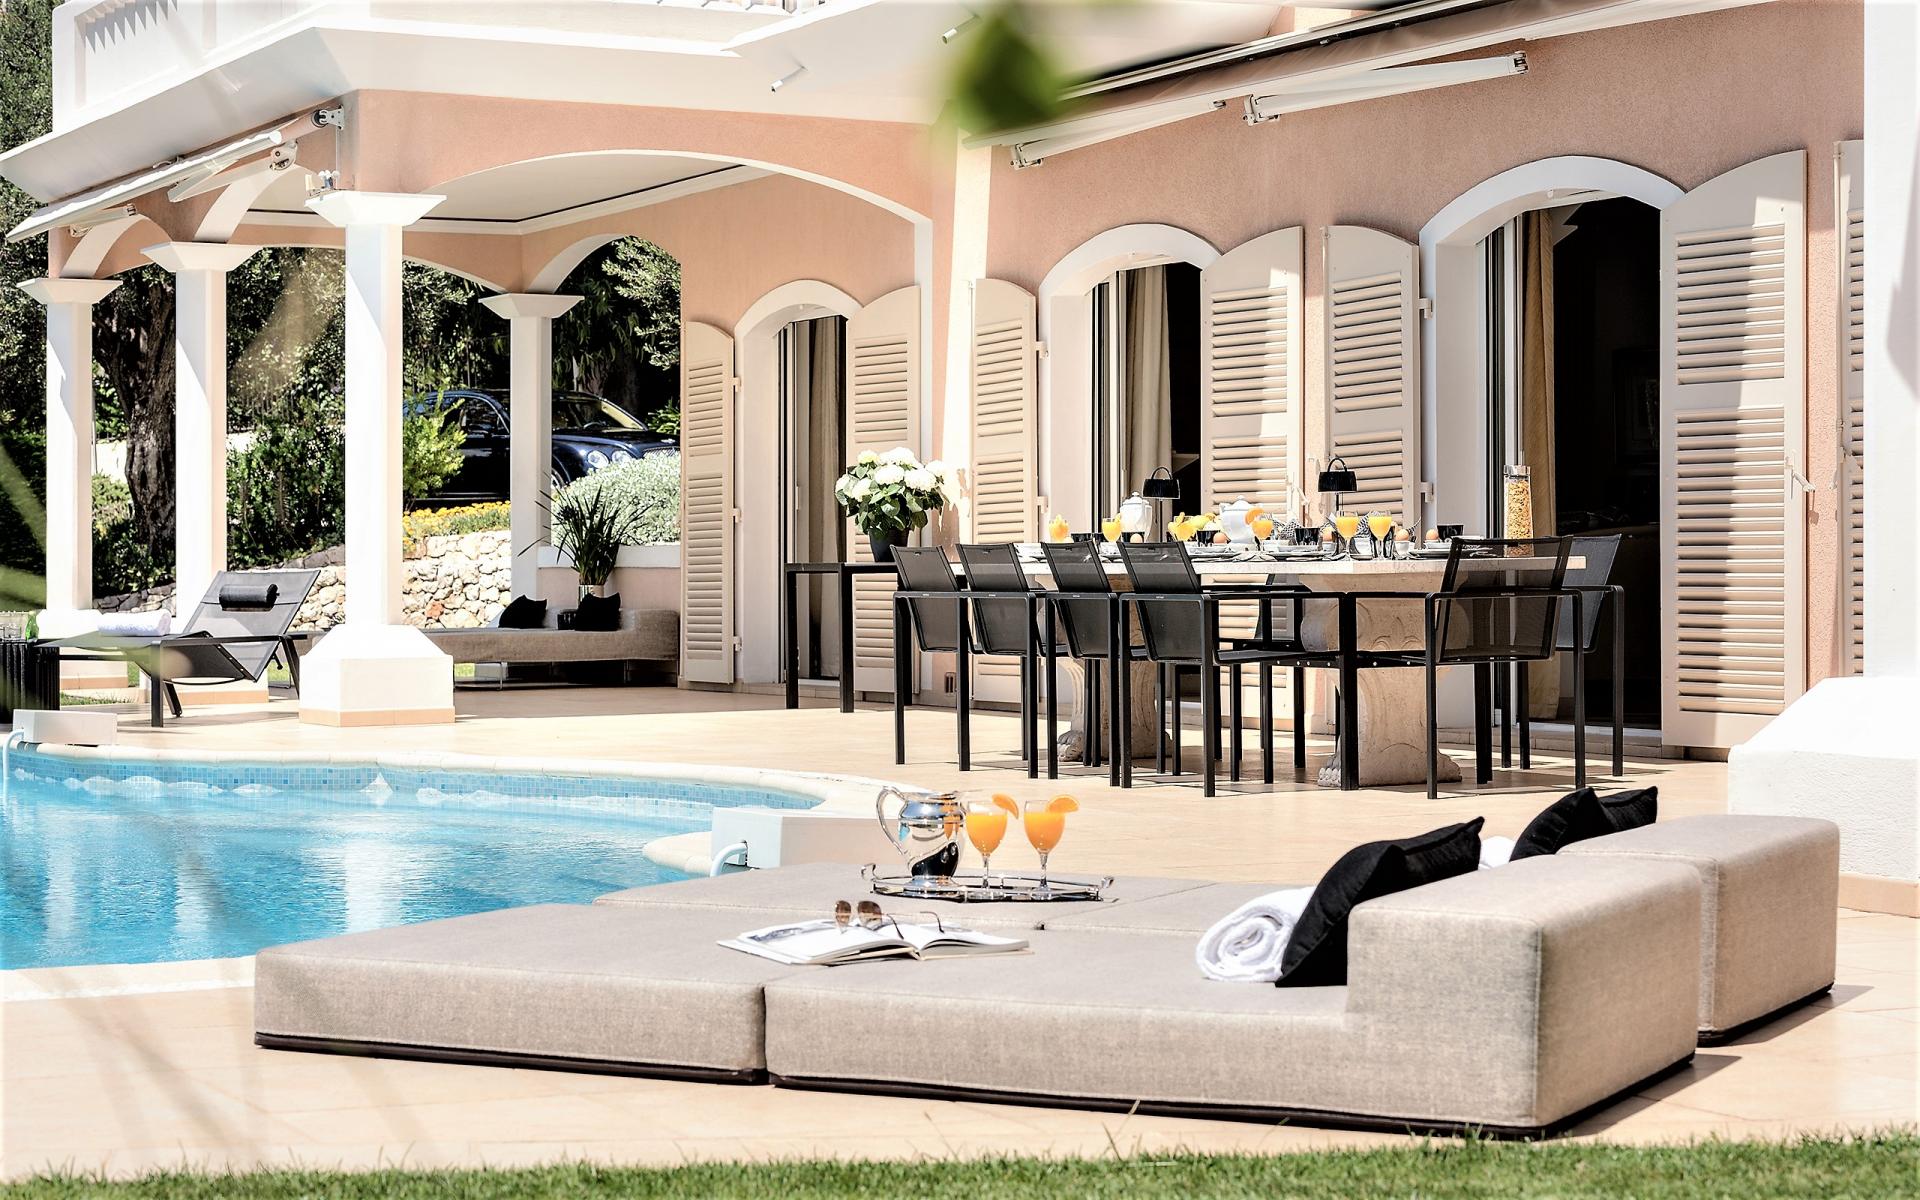 VILLA ROSE FOR A RELAXING HOLIDAY IN THE COTE D'AZUR